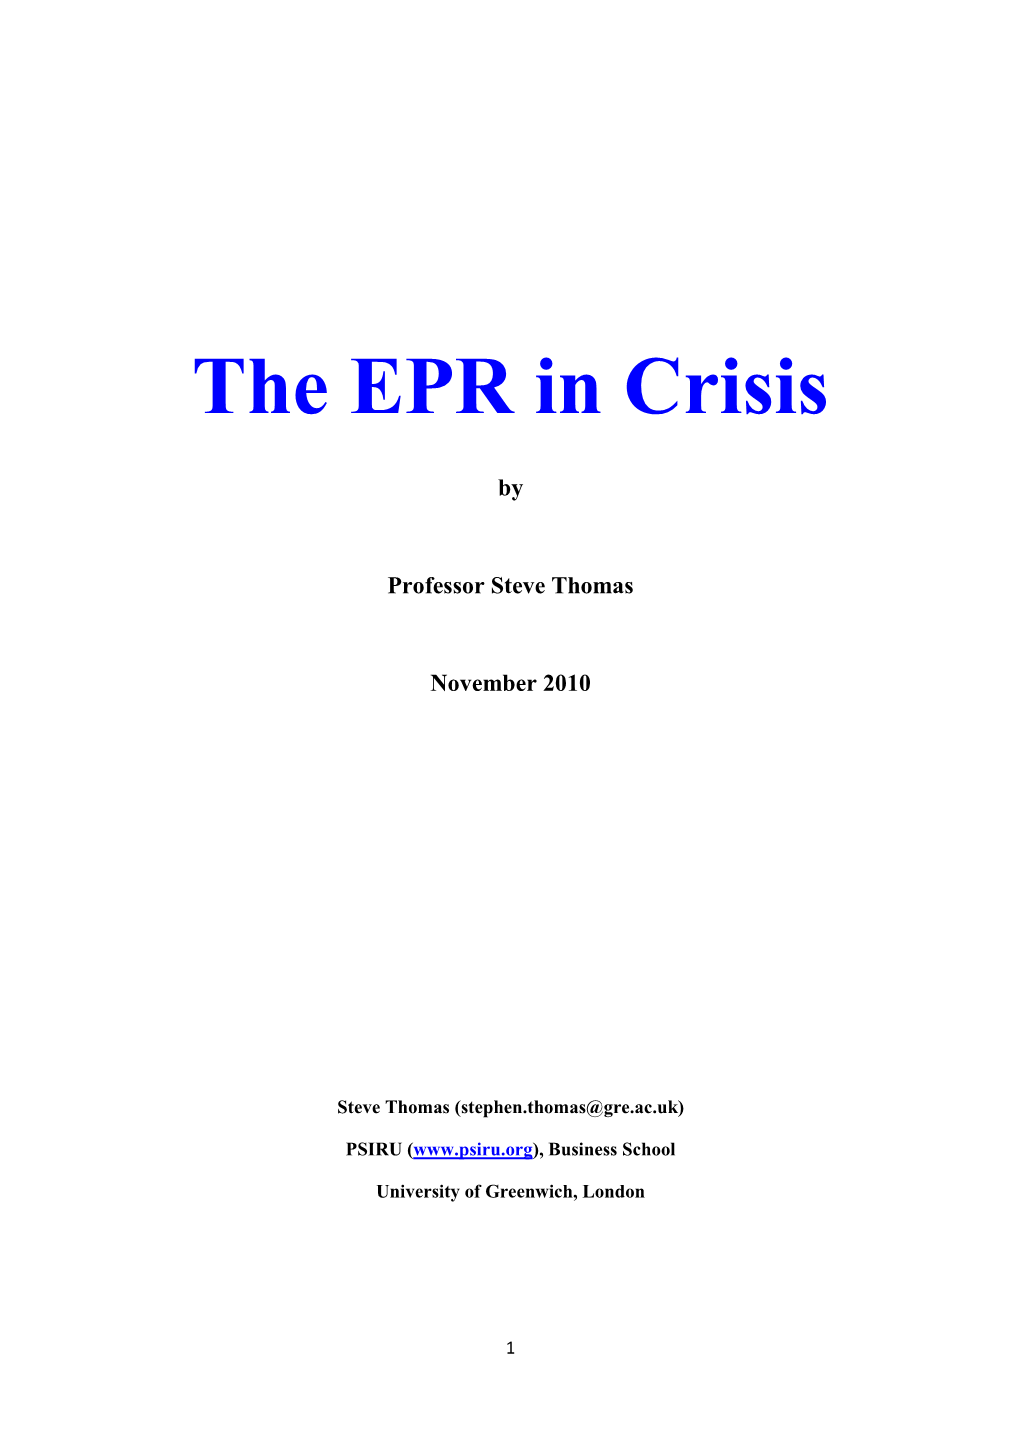 The EPR in Crisis. a New Report from Steve Thomas of University Of